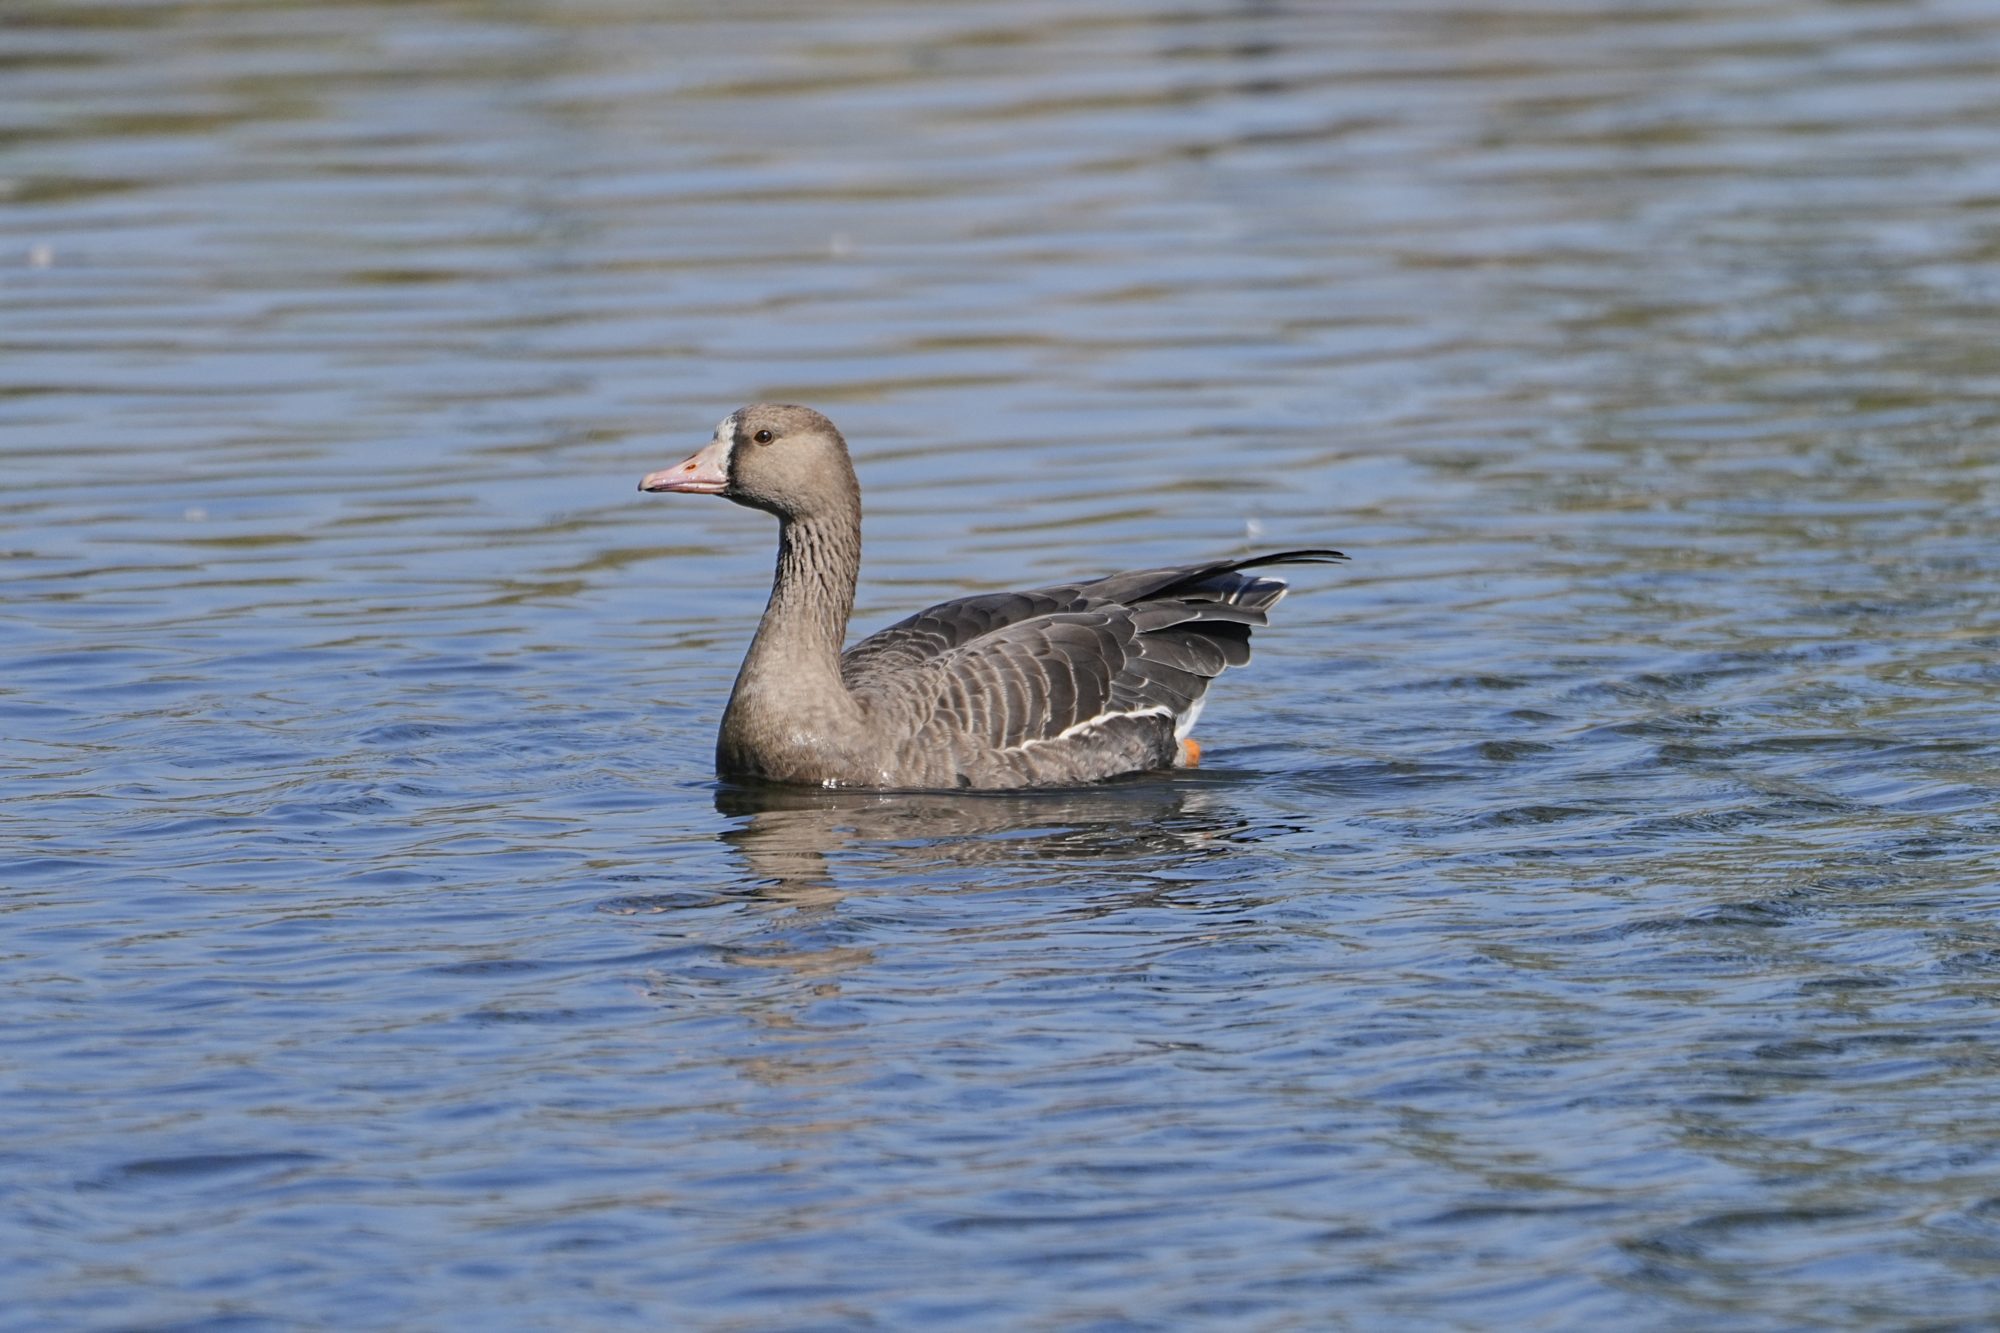 A Greater White-fronted Goose -- a mostly brown goose with a white face patch above its bill -- is swimming in the water